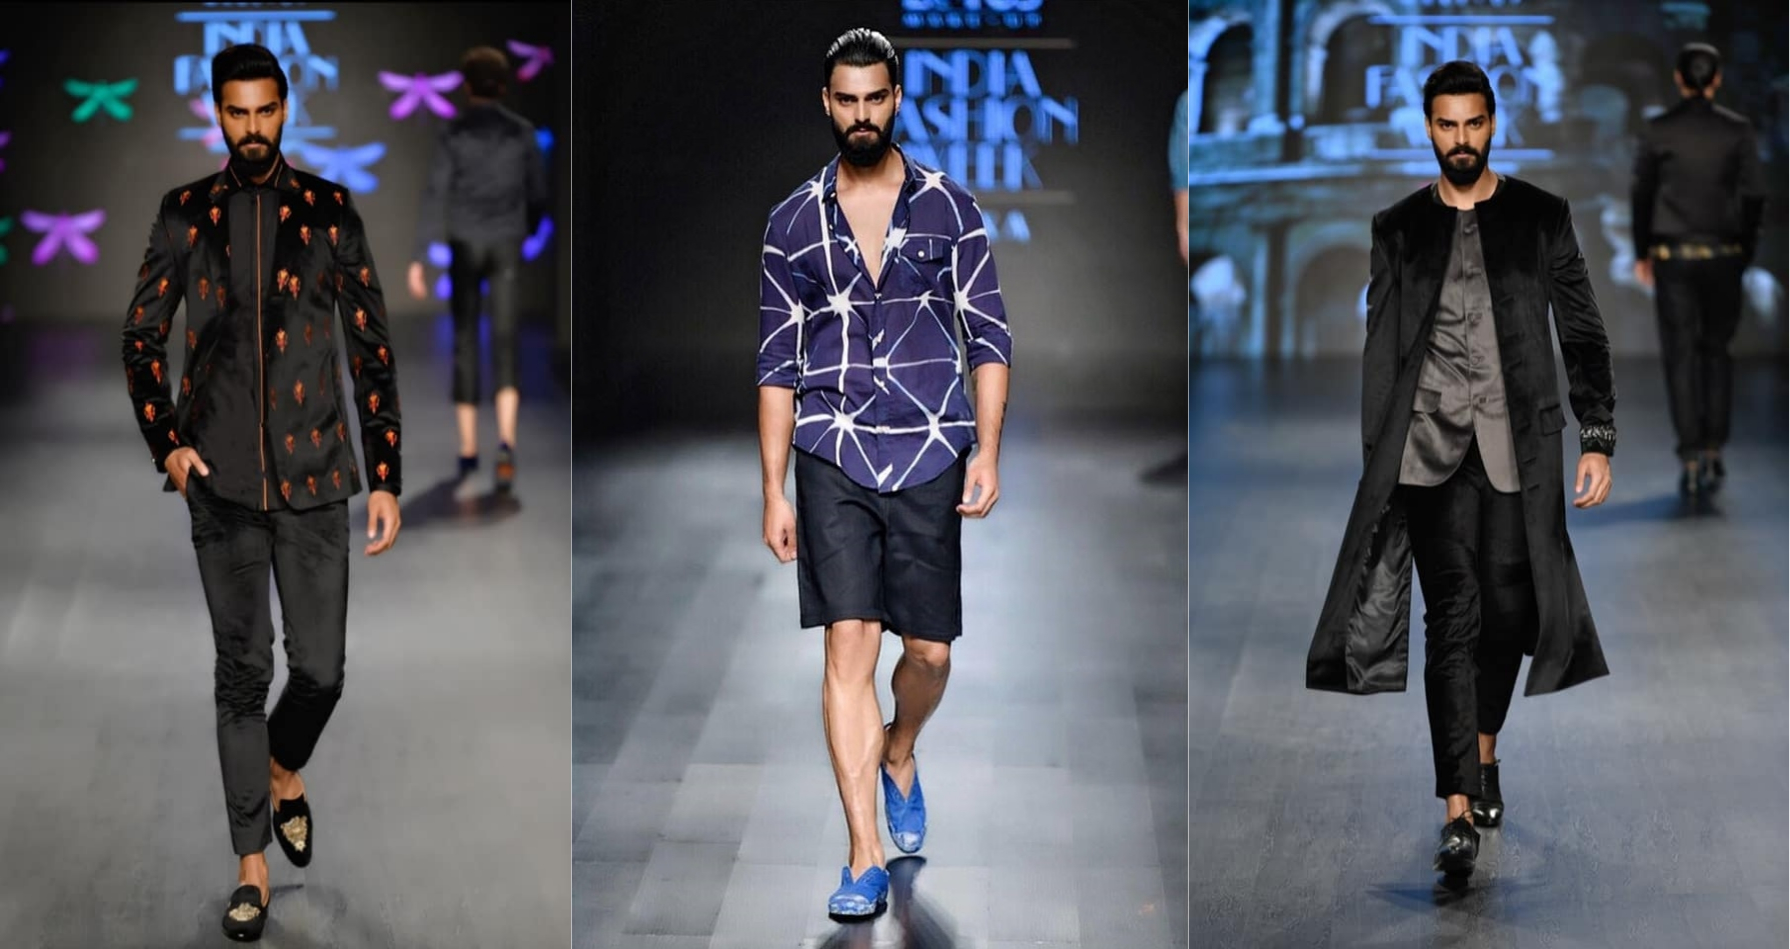 Dushyant Singh Raghuvanshi: A Journey from Saharanpur to Super Model ...